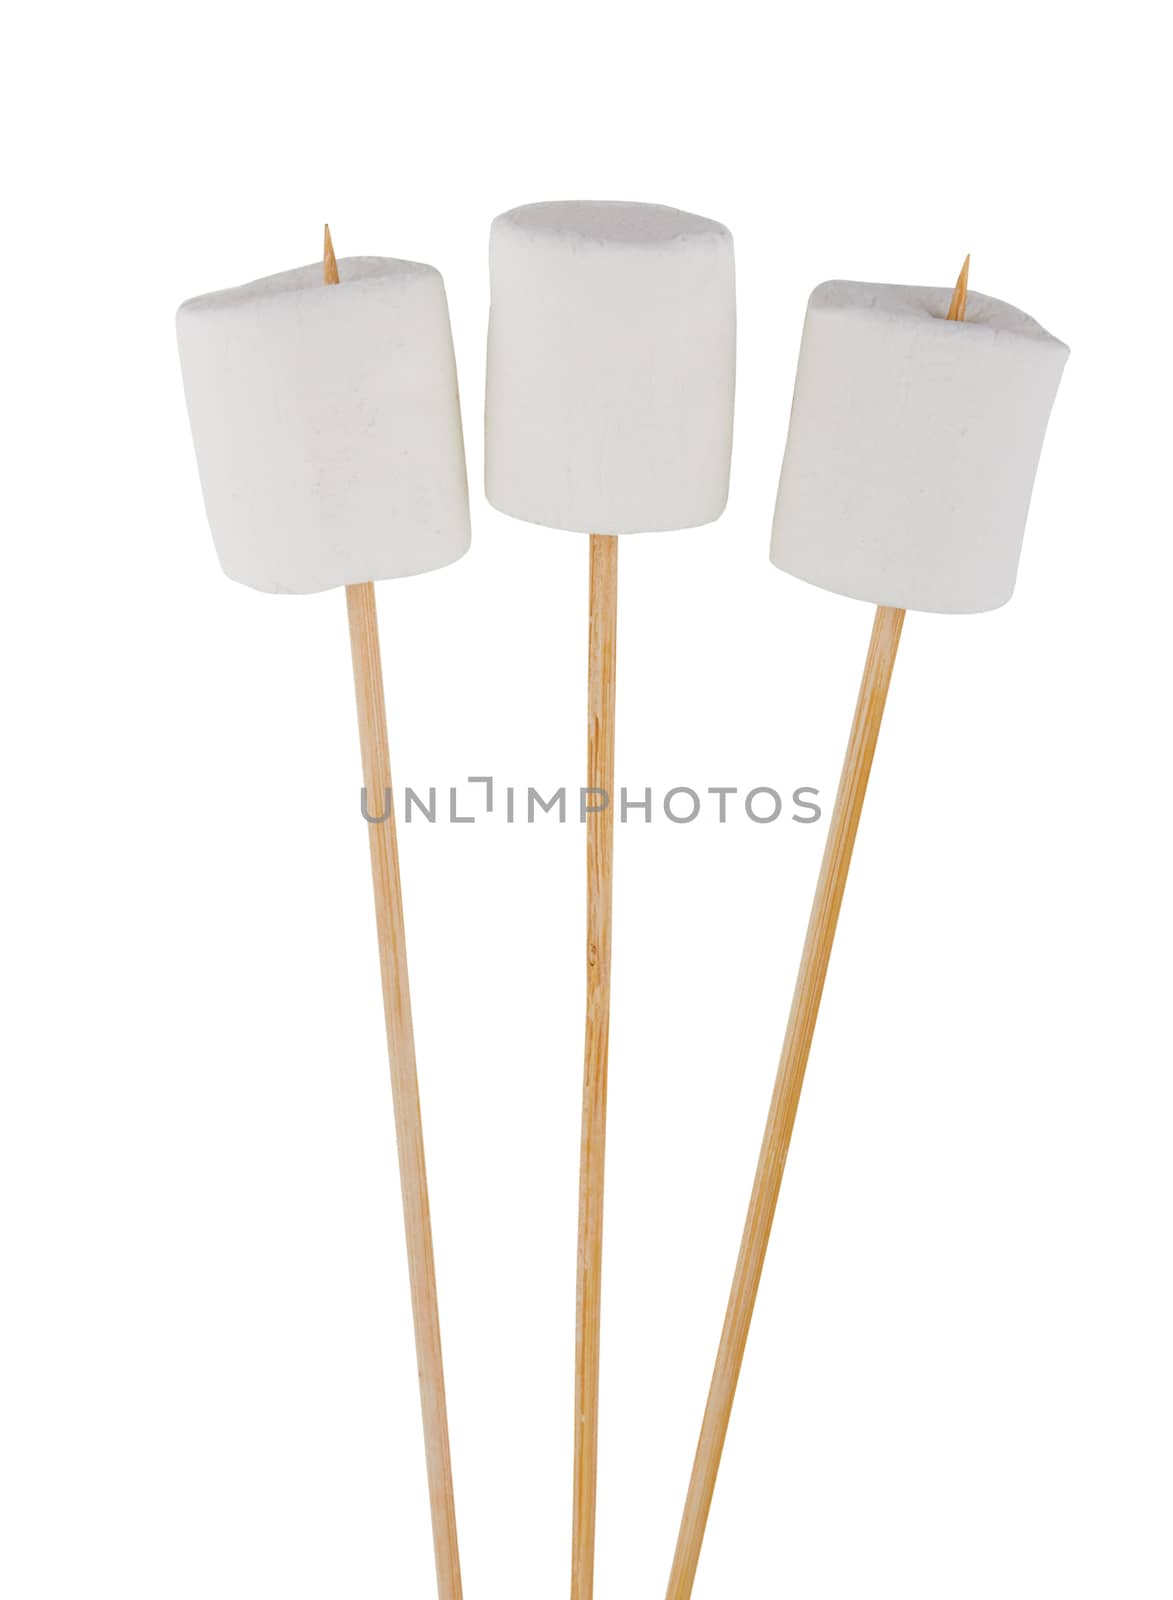 Marshmallow on wooden stick  by pioneer111